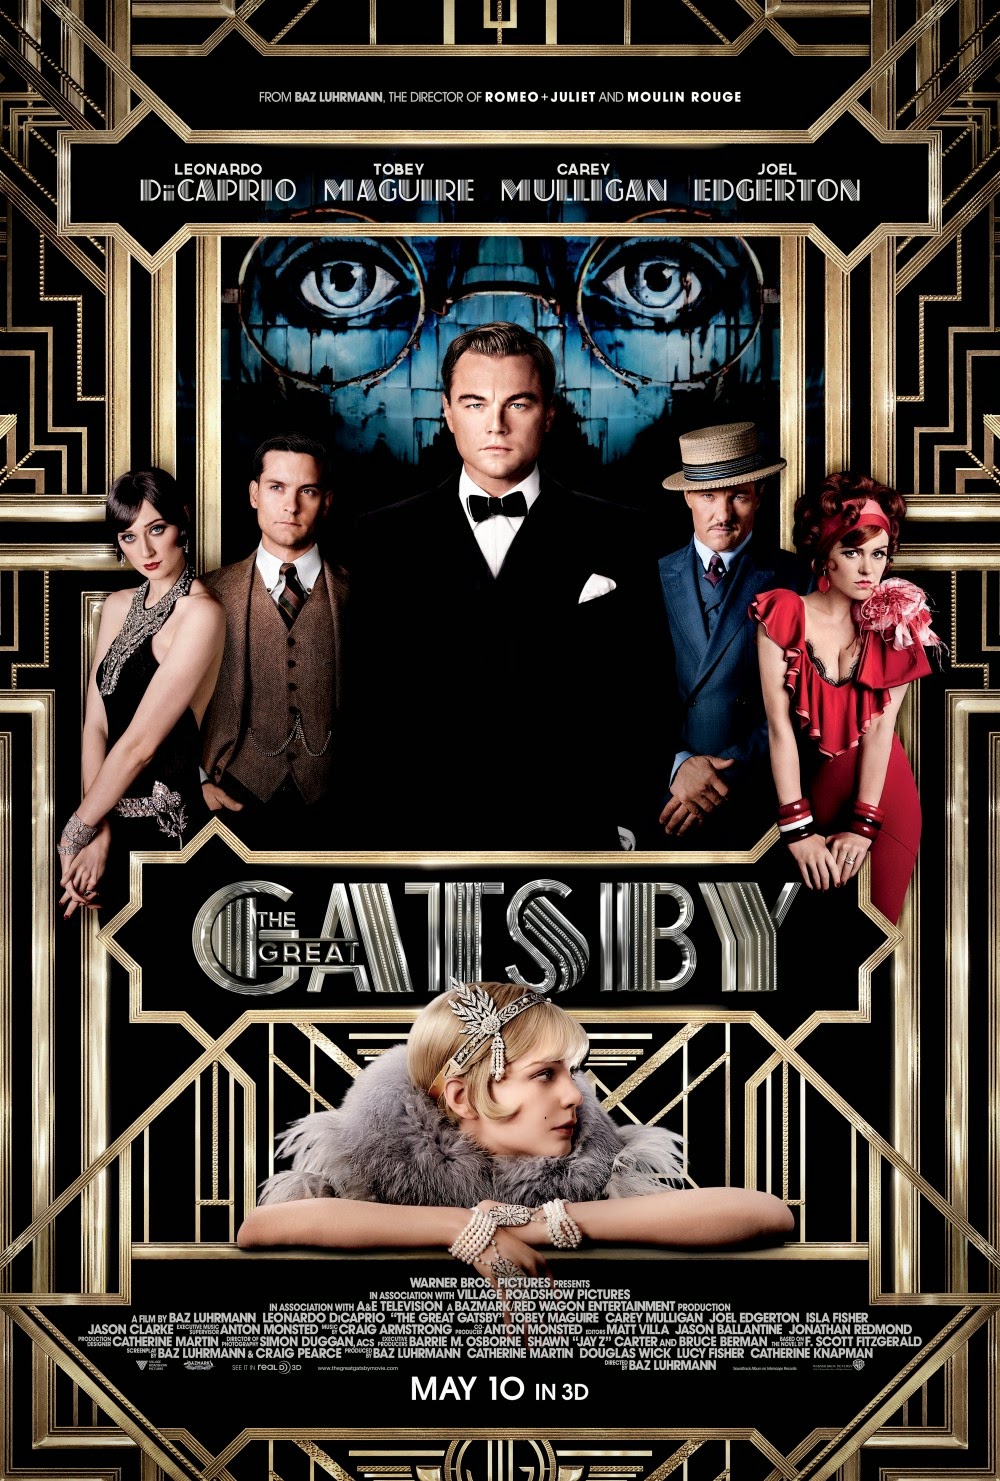 http://discover.halifaxpubliclibraries.ca/?q=title:great%20gatsby